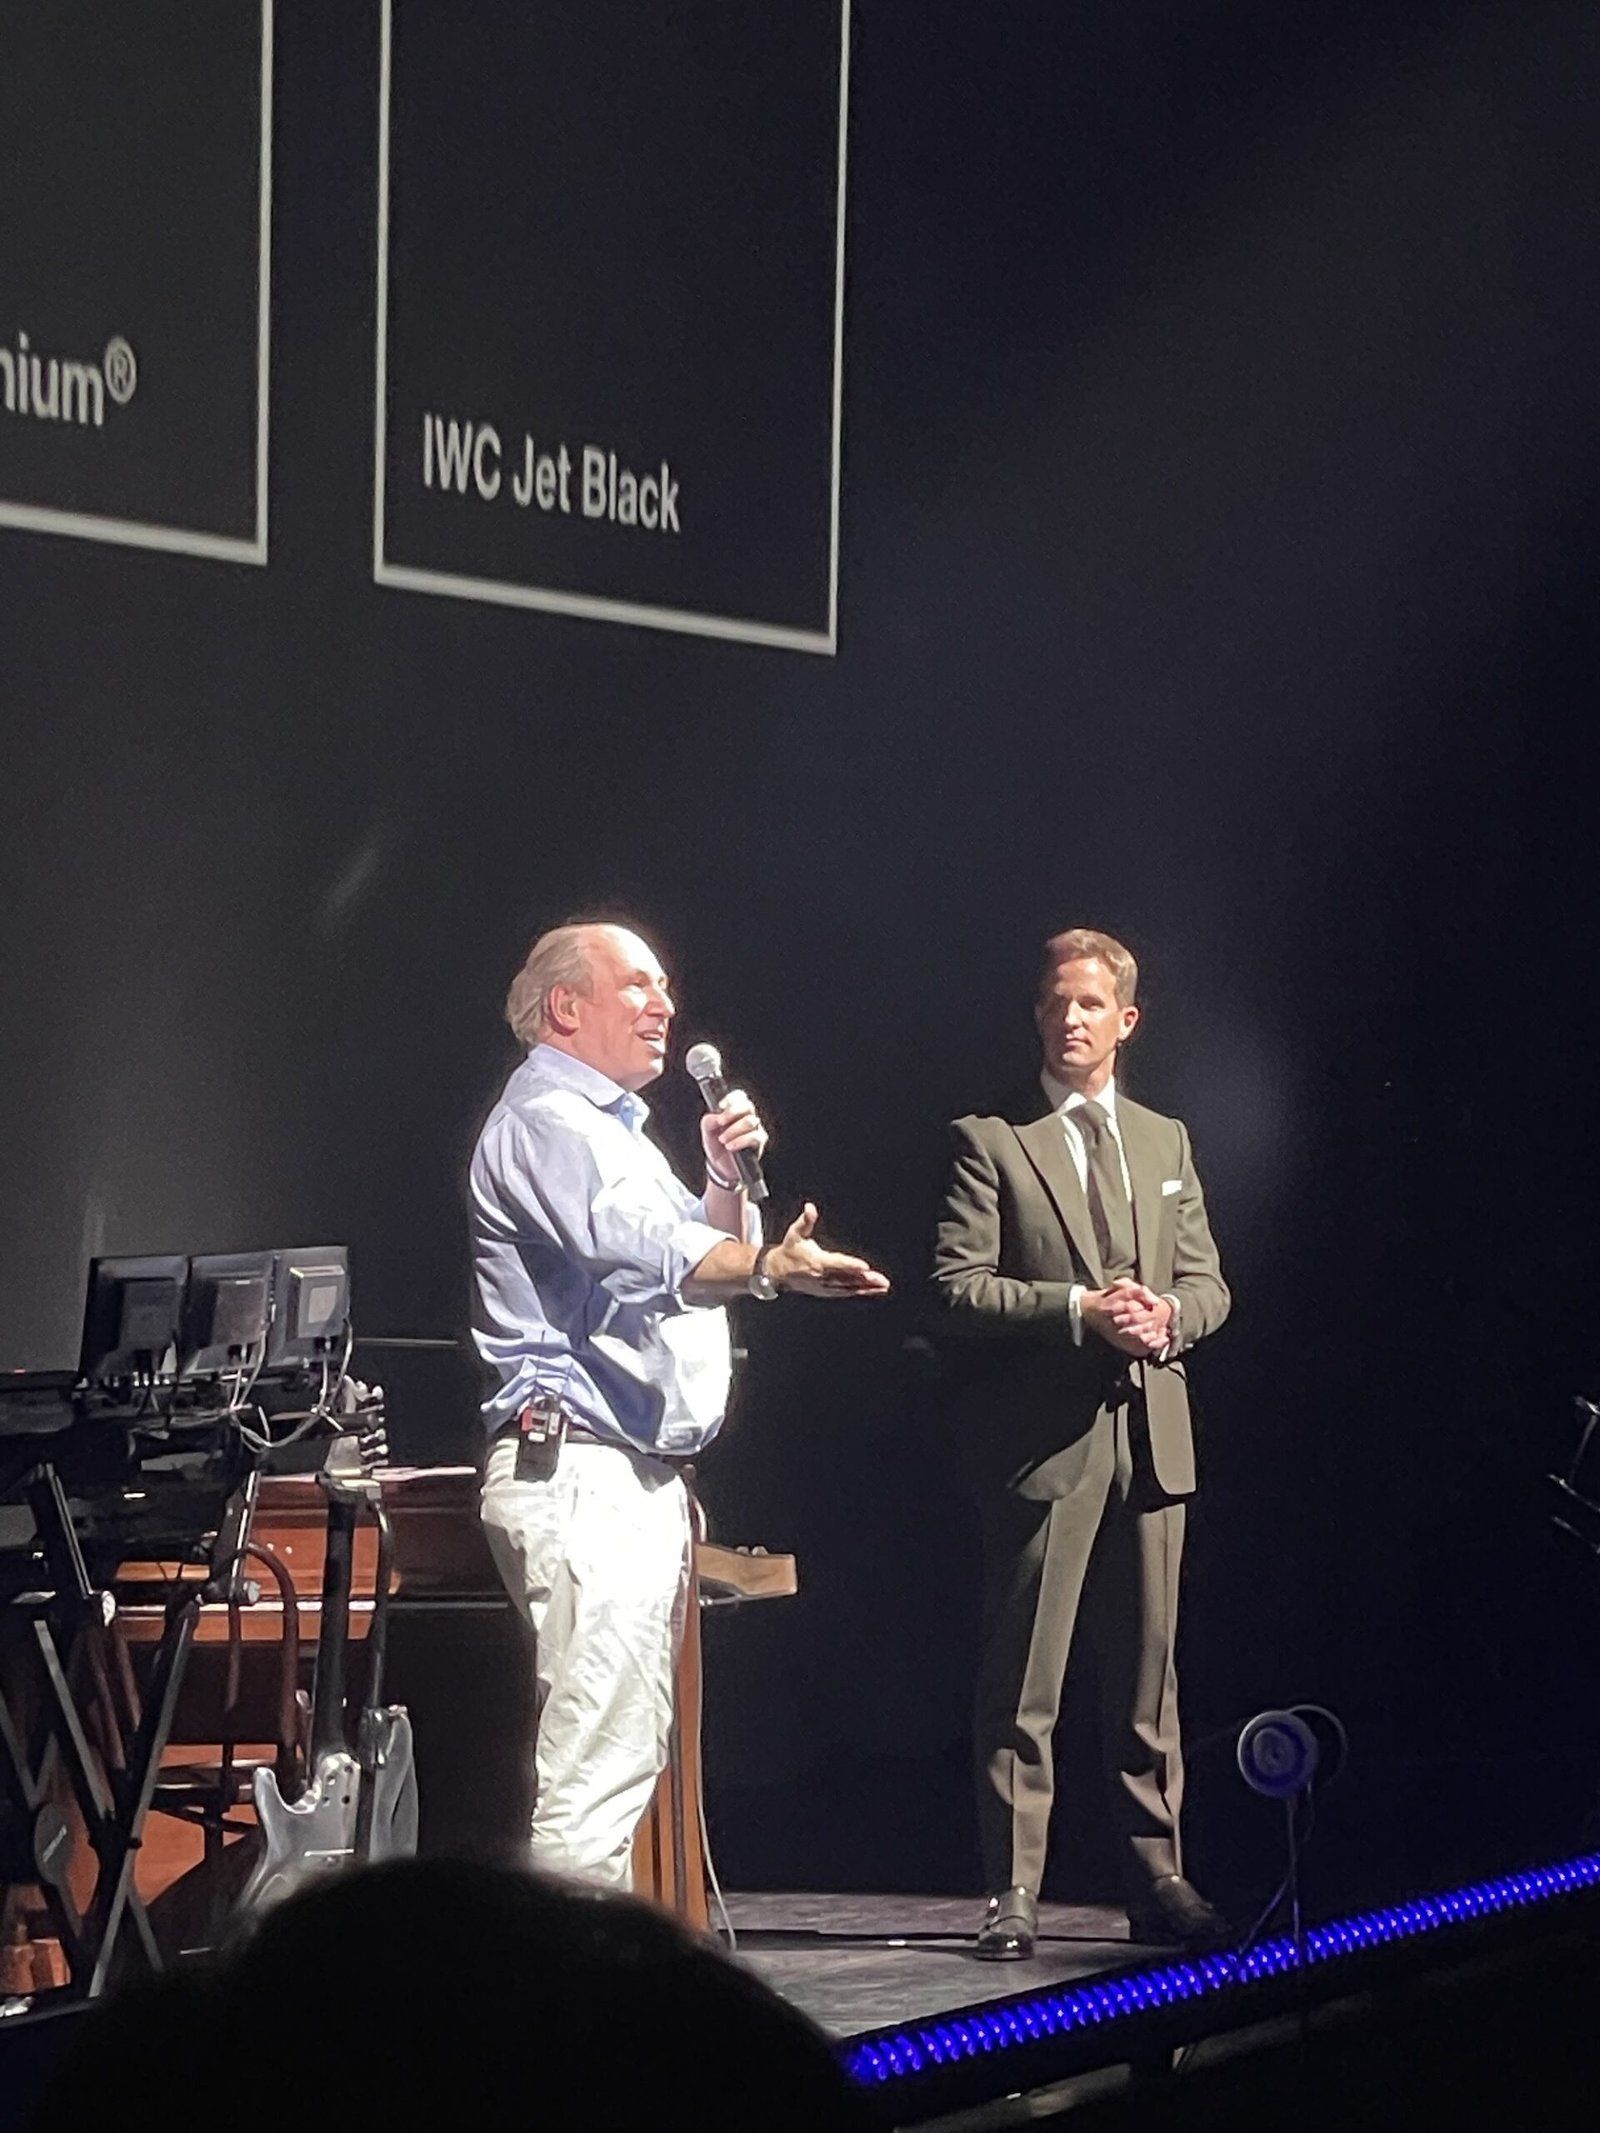 Hans Zimmer with the IWC CEO - Christoph Grainger-Herr